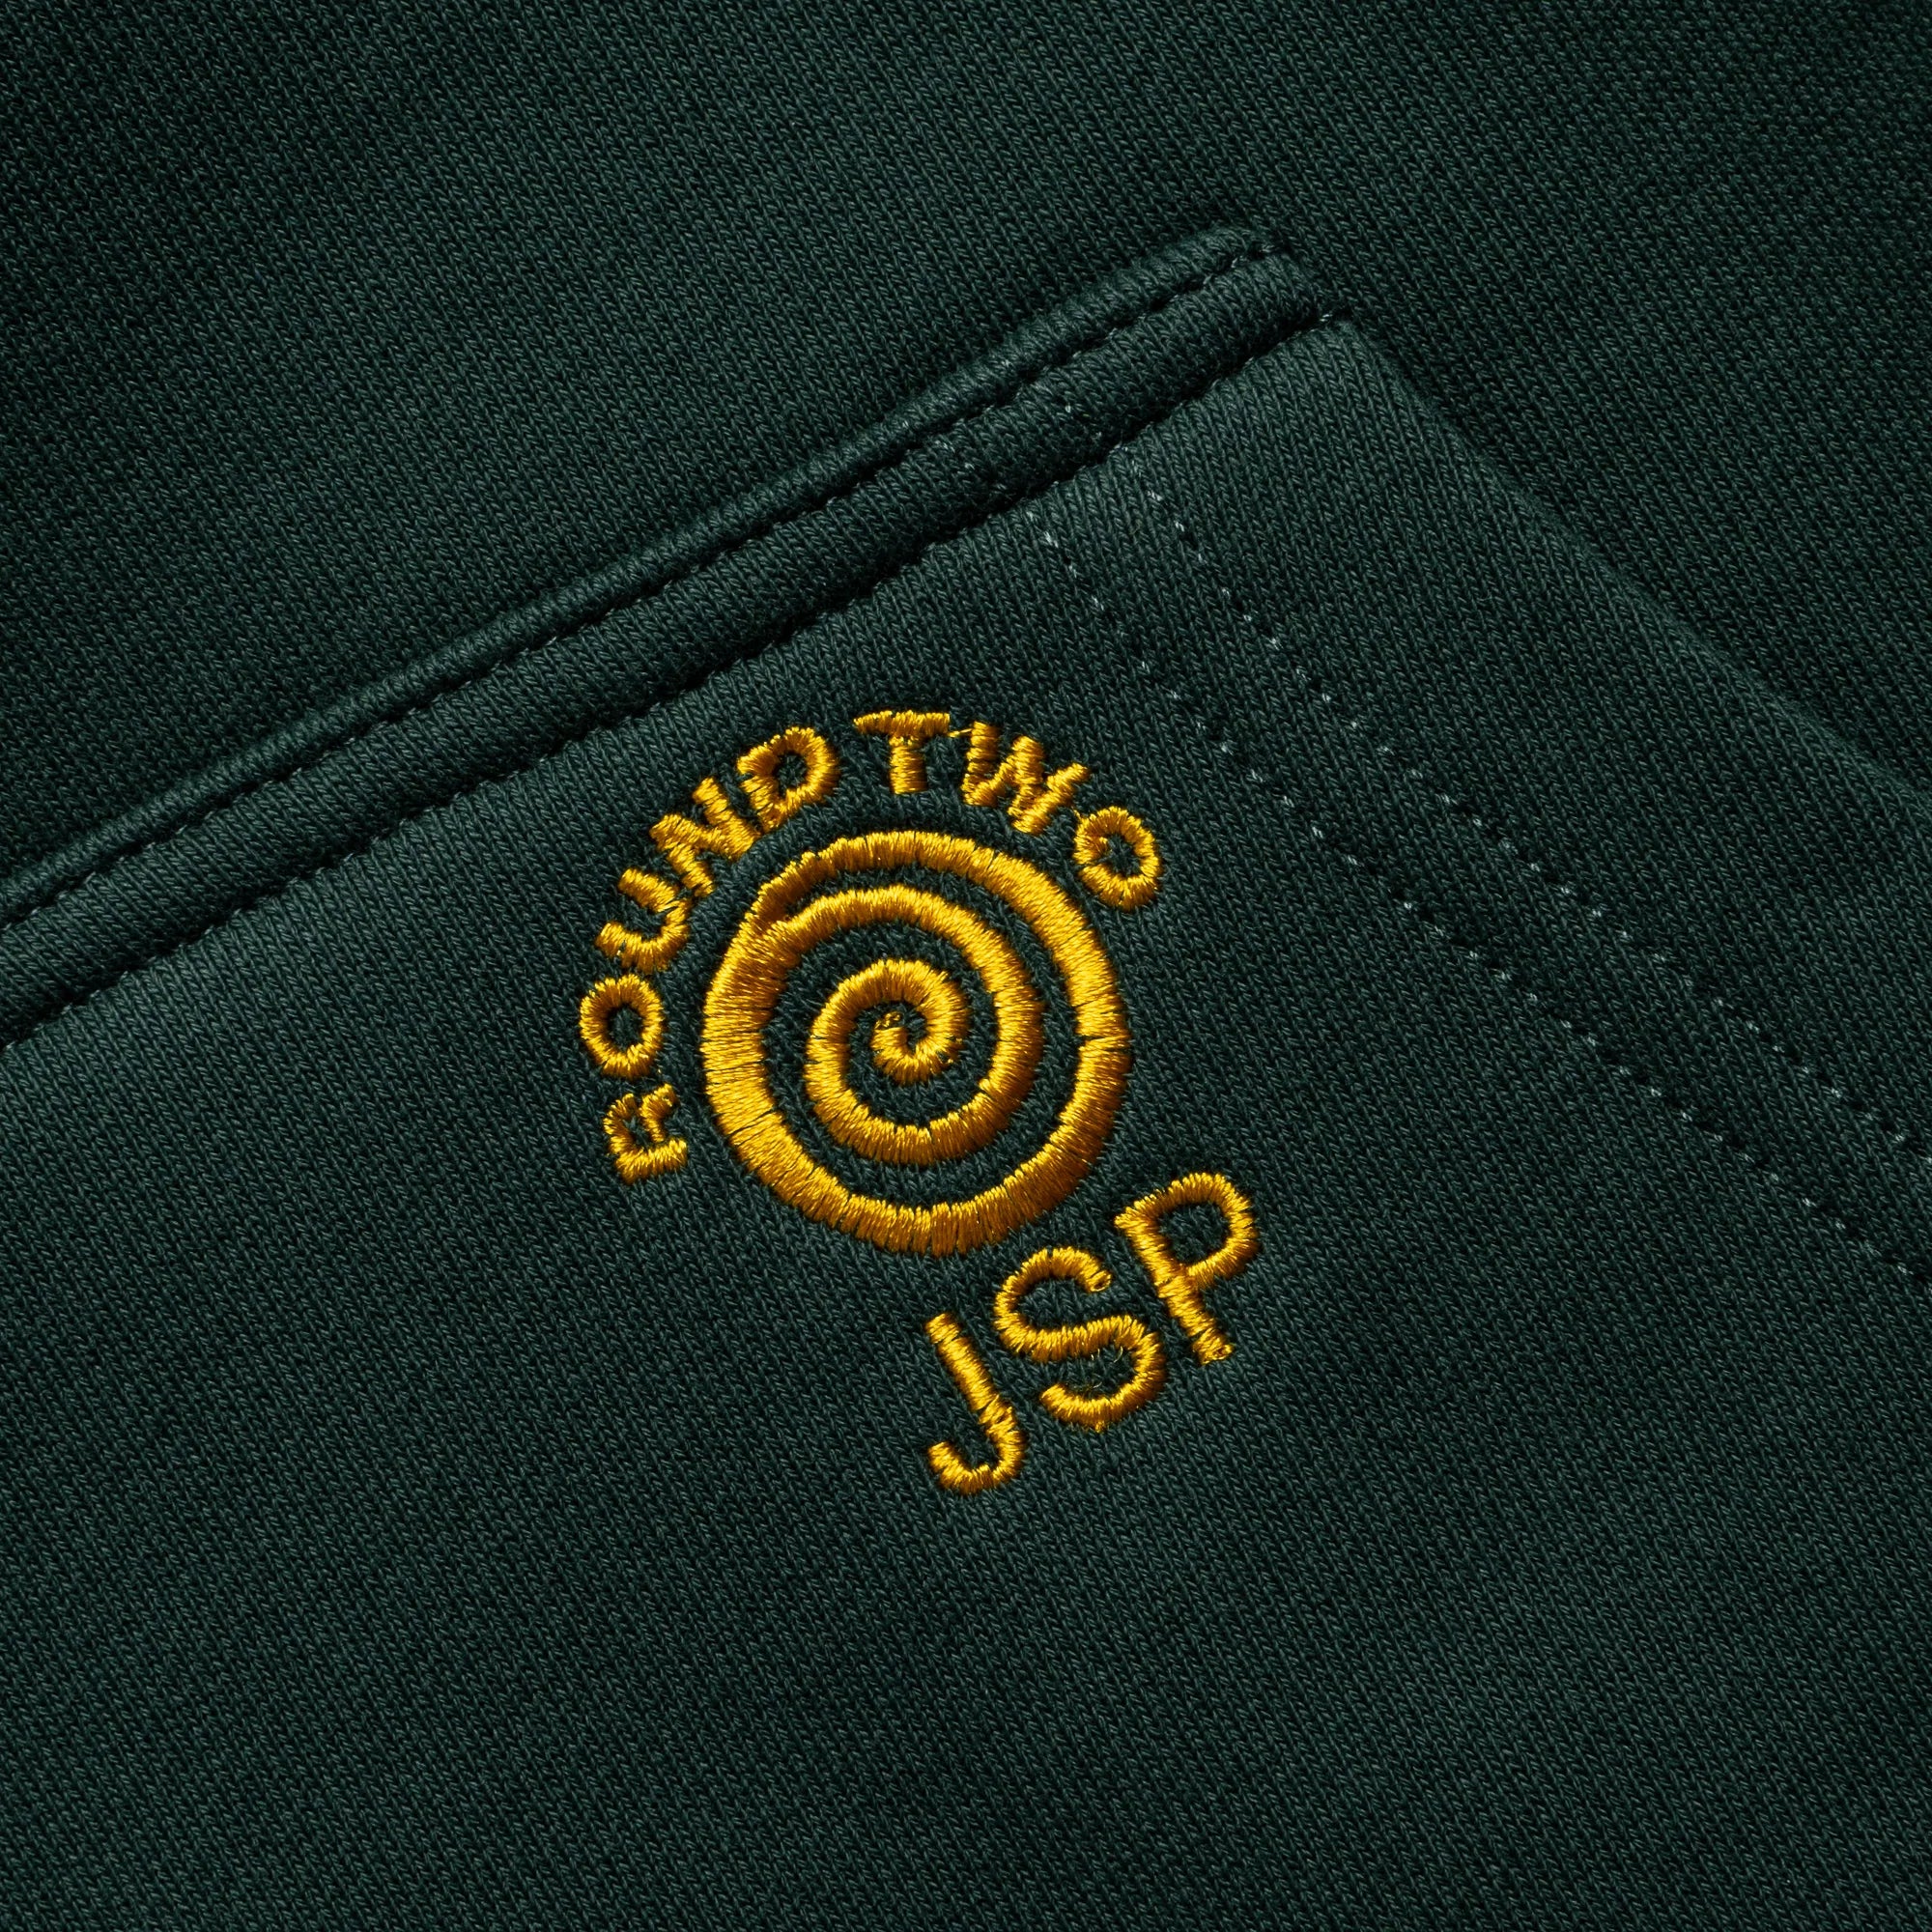 Round Two x JSP Hoodie 'Forest Green'